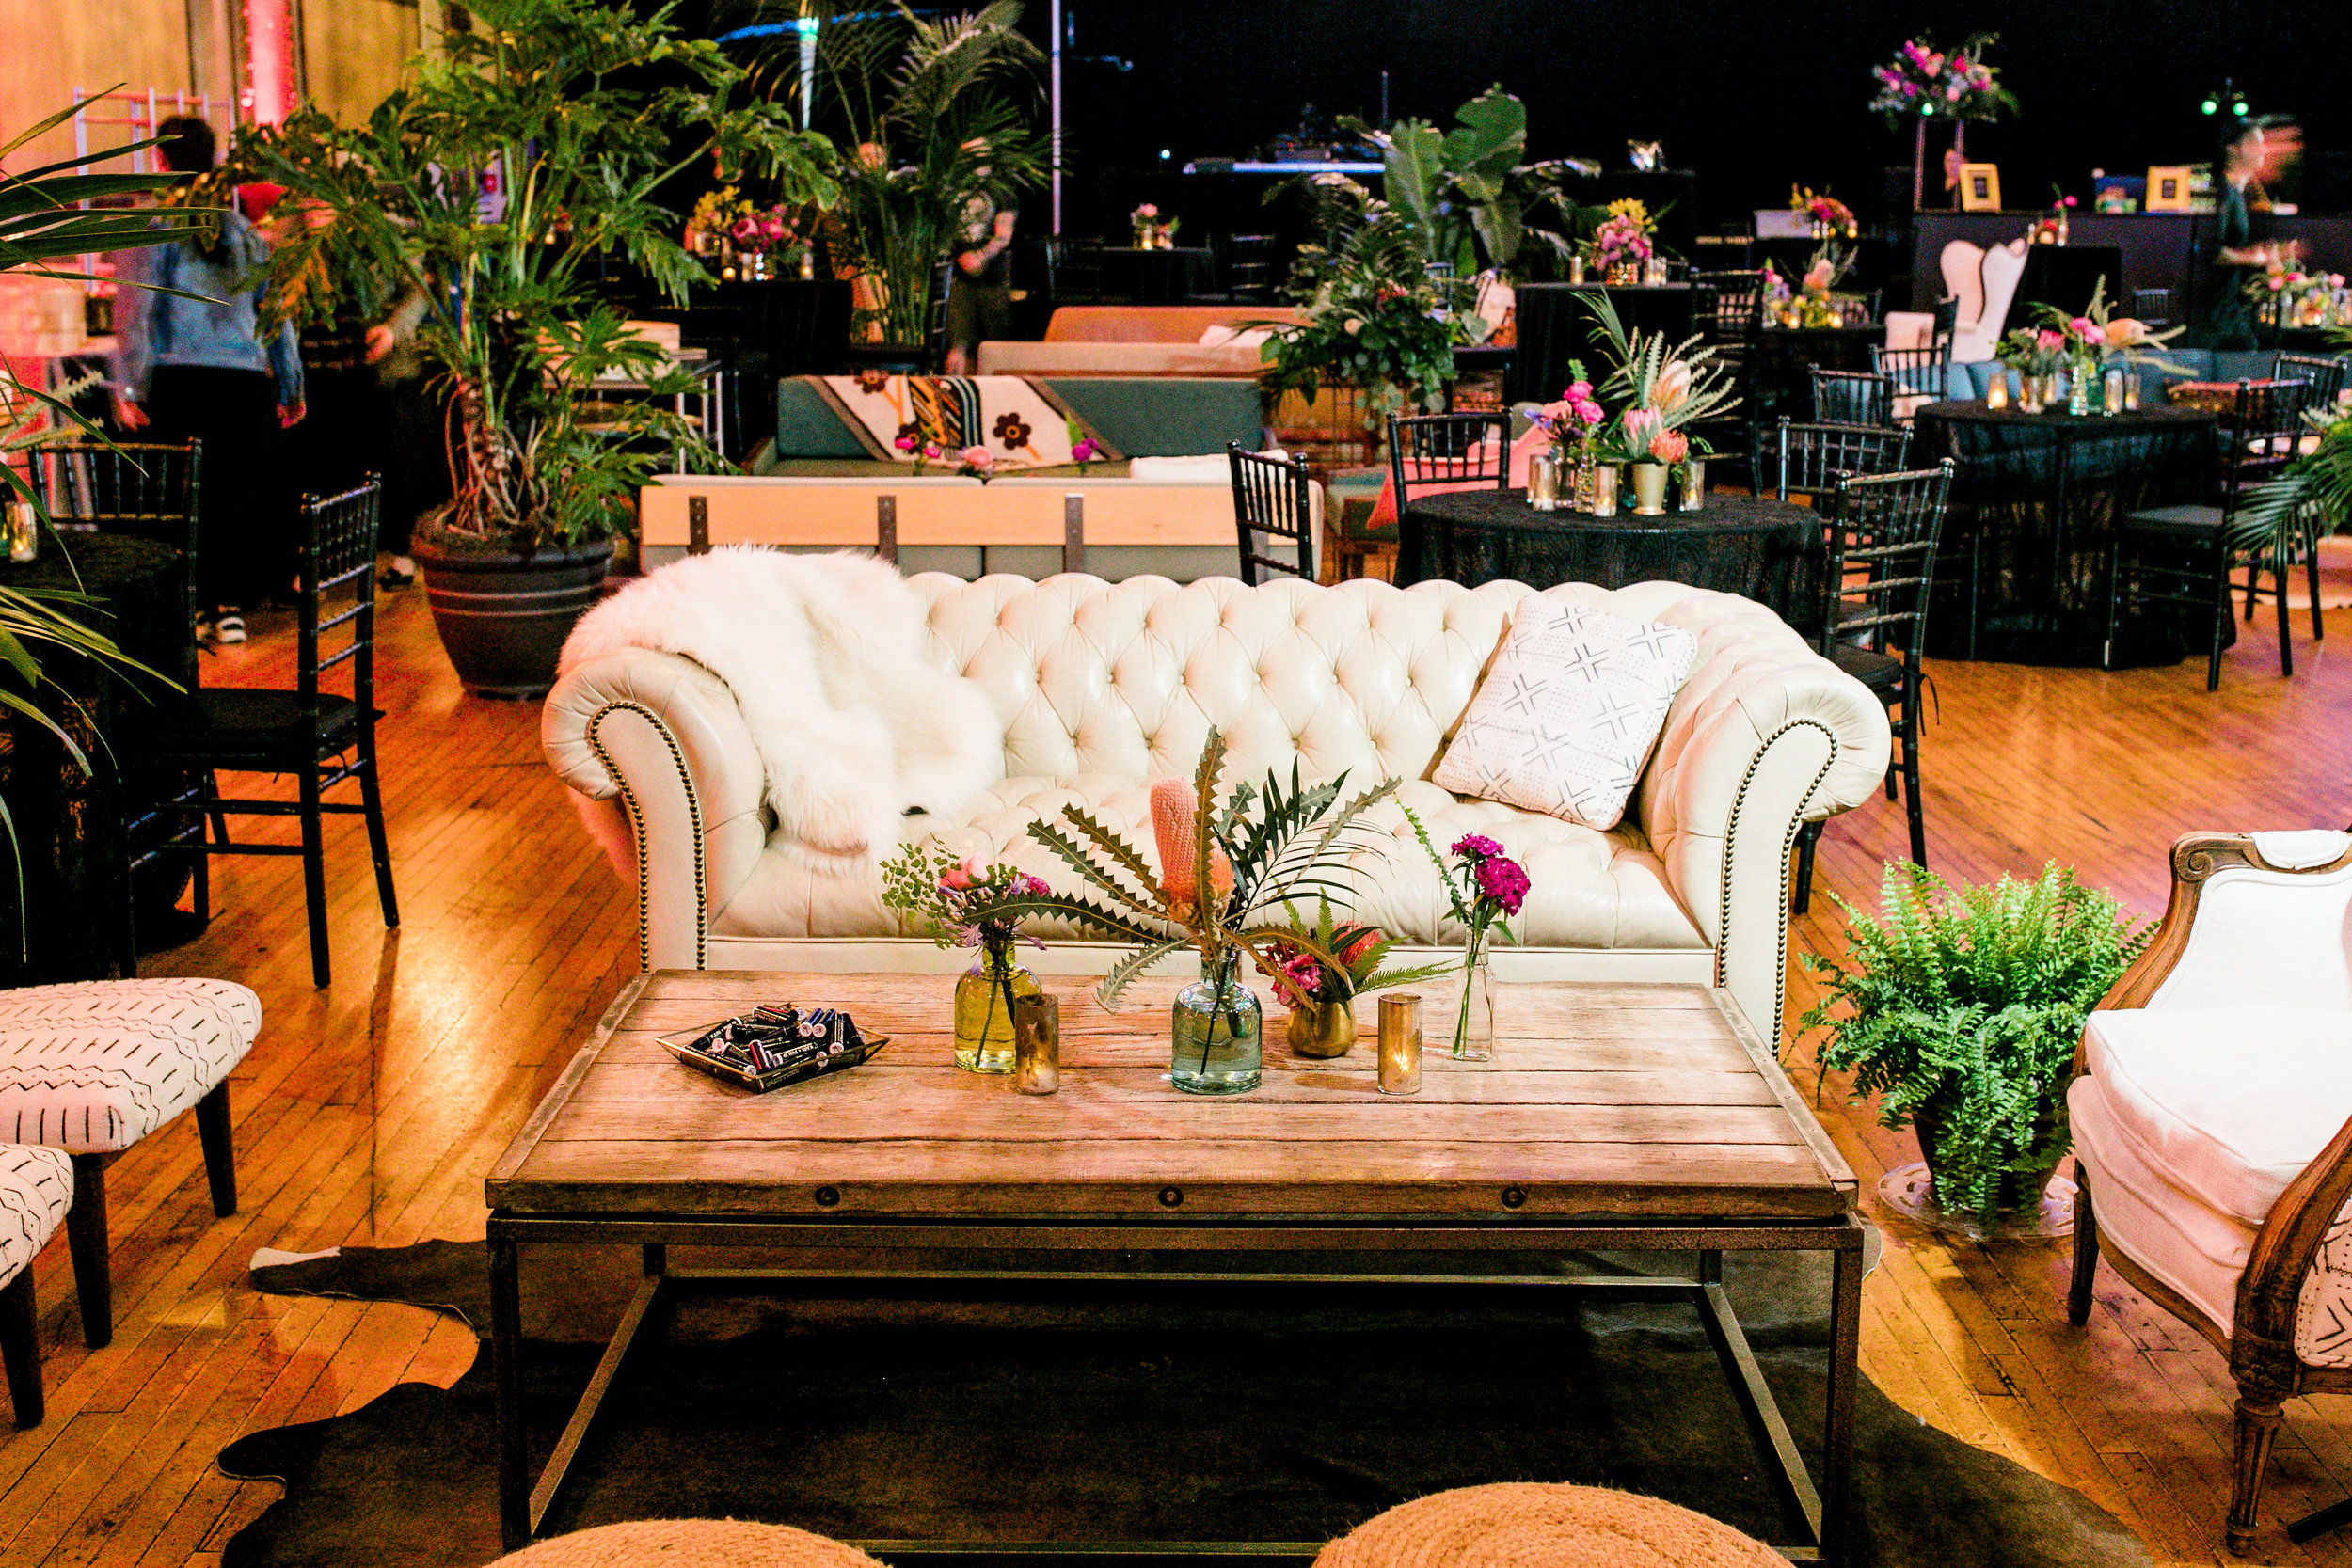 Vintage Lounge Furniture 4_ROQUE Events_Finch Photography.jpg